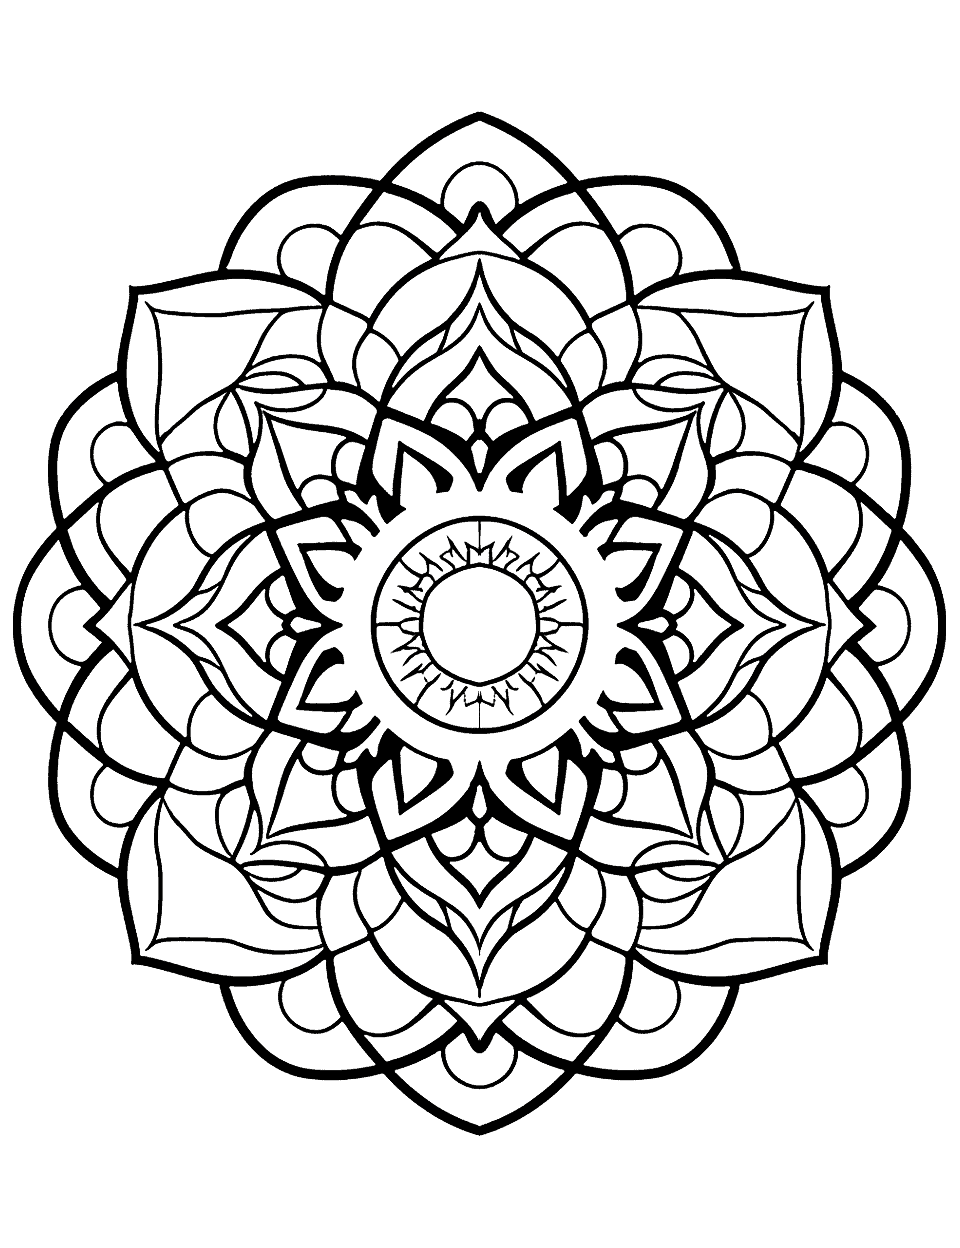 Abstract Expression Mandala Coloring Page - A mandala filled with abstract shapes and patterns, giving children the freedom to interpret and color as they wish.